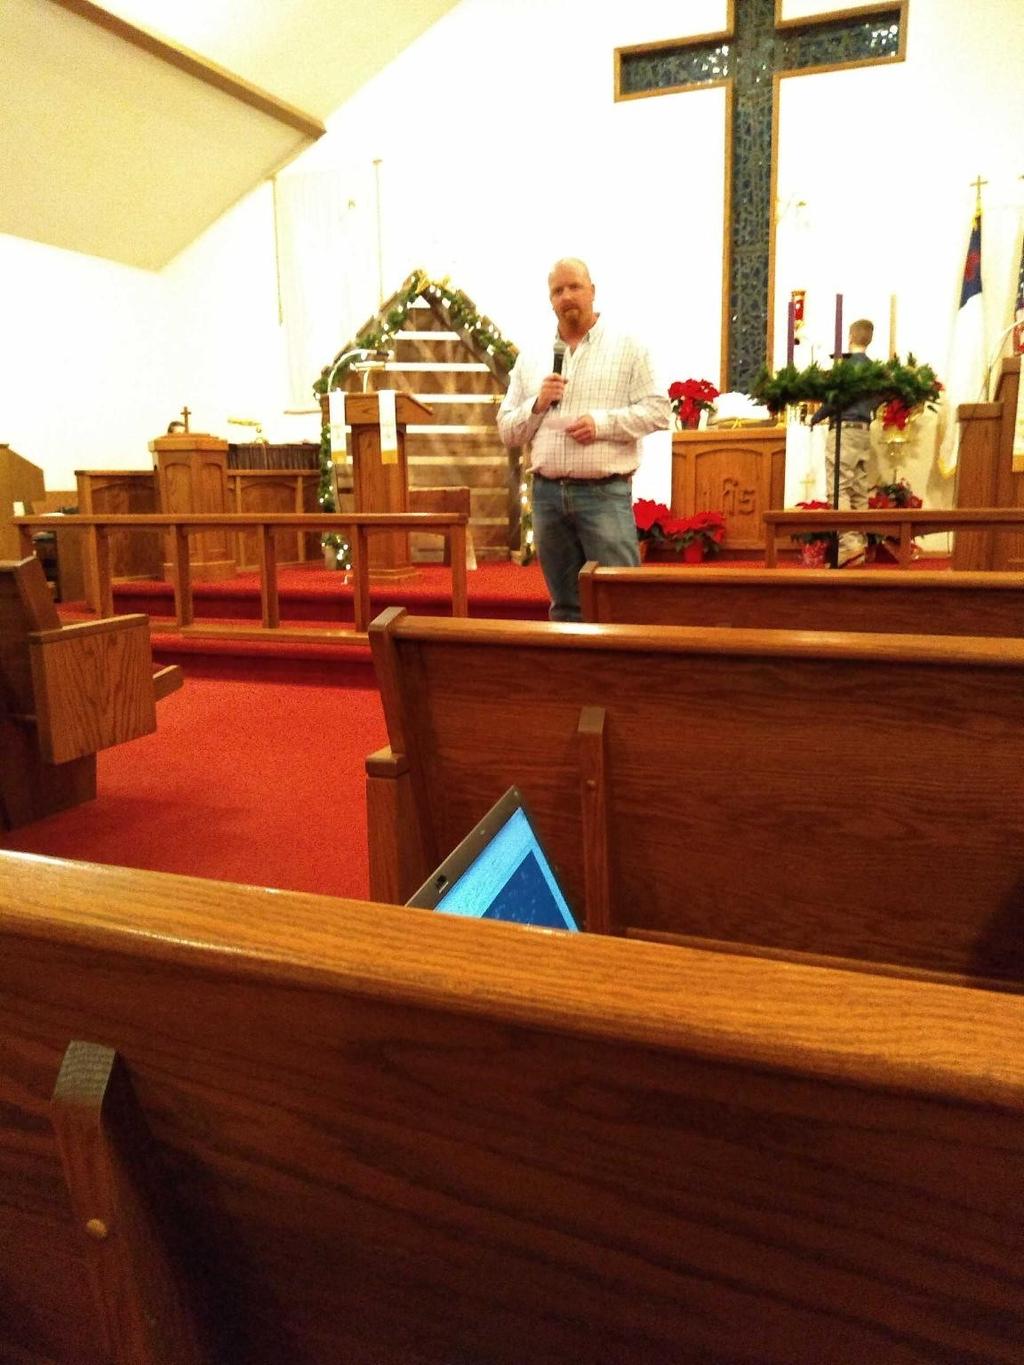 CHRISTMAS EVE 2018 Christmas Eve 2018 found the Holmes and Samuel Lutheran congregations joining together to